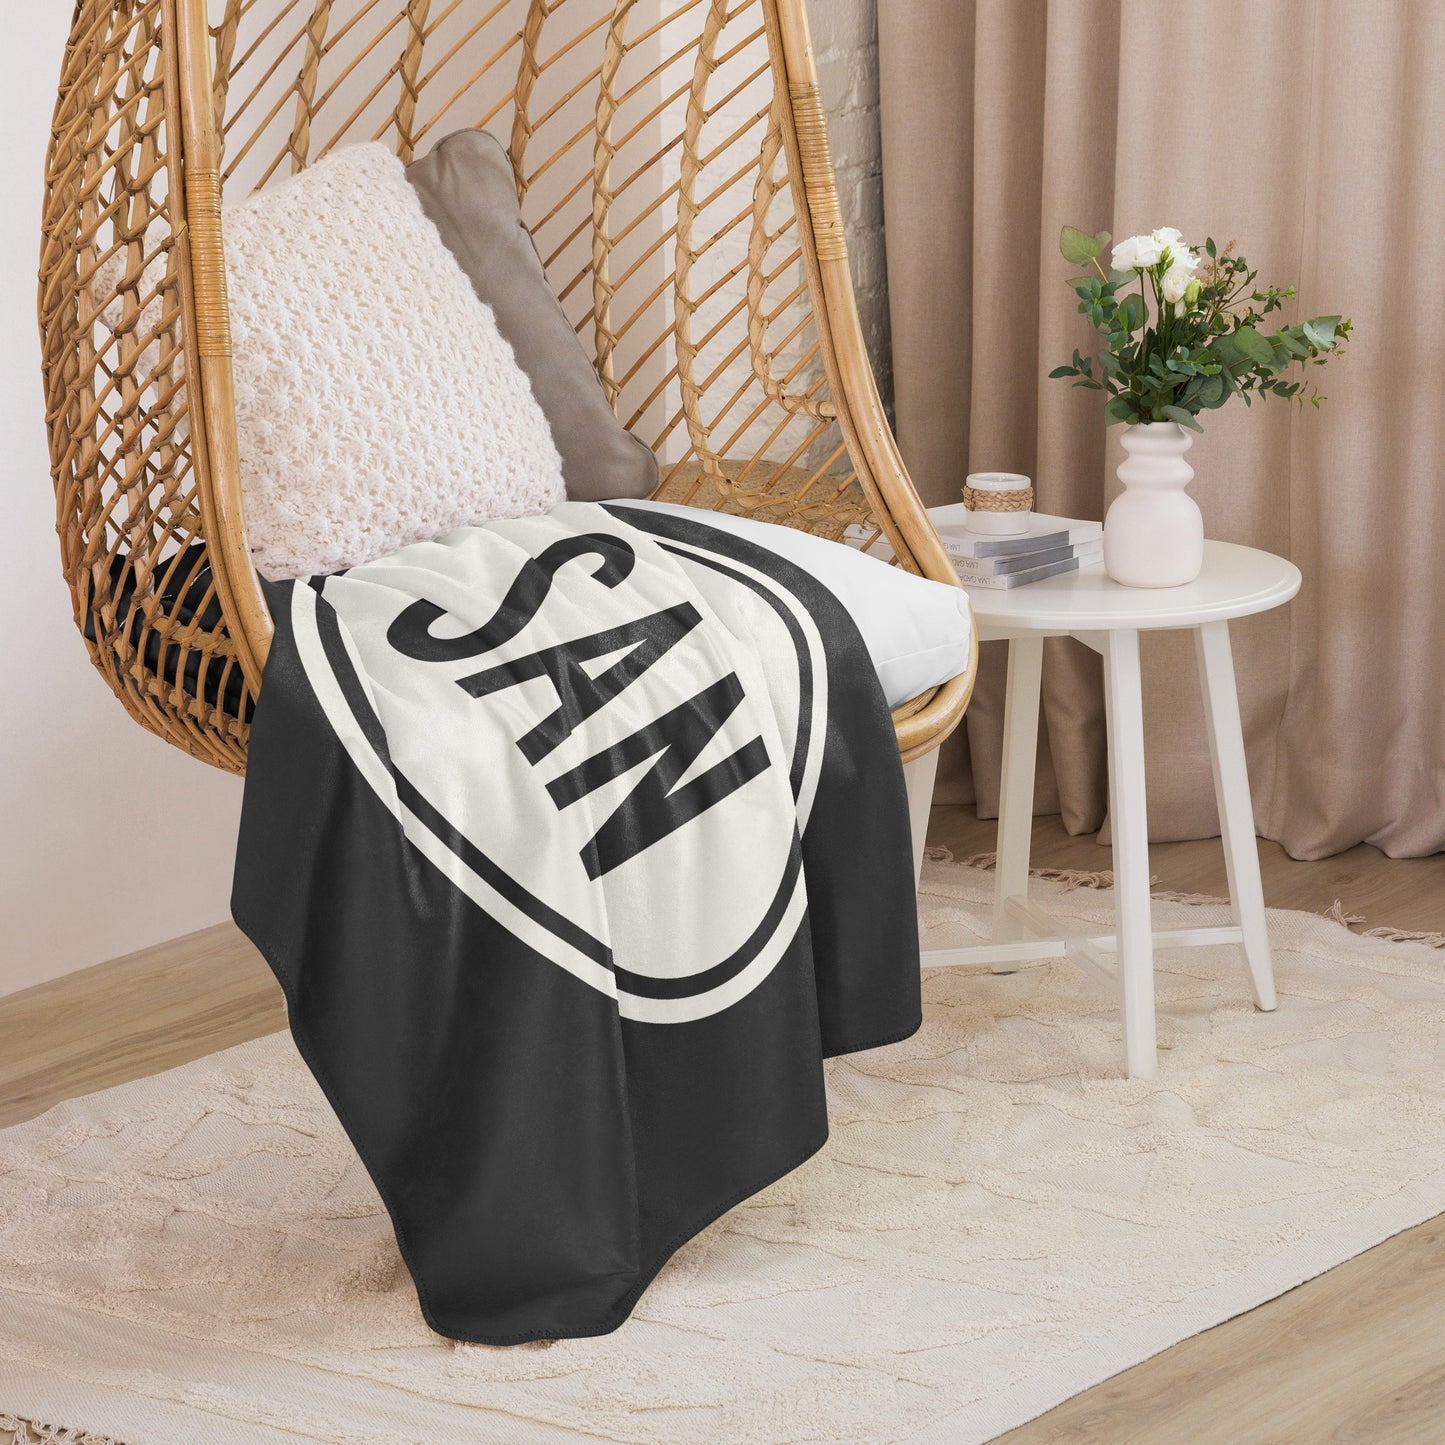 Unique Travel Gift Sherpa Blanket - White Oval • SAN San Diego • YHM Designs - Image 06